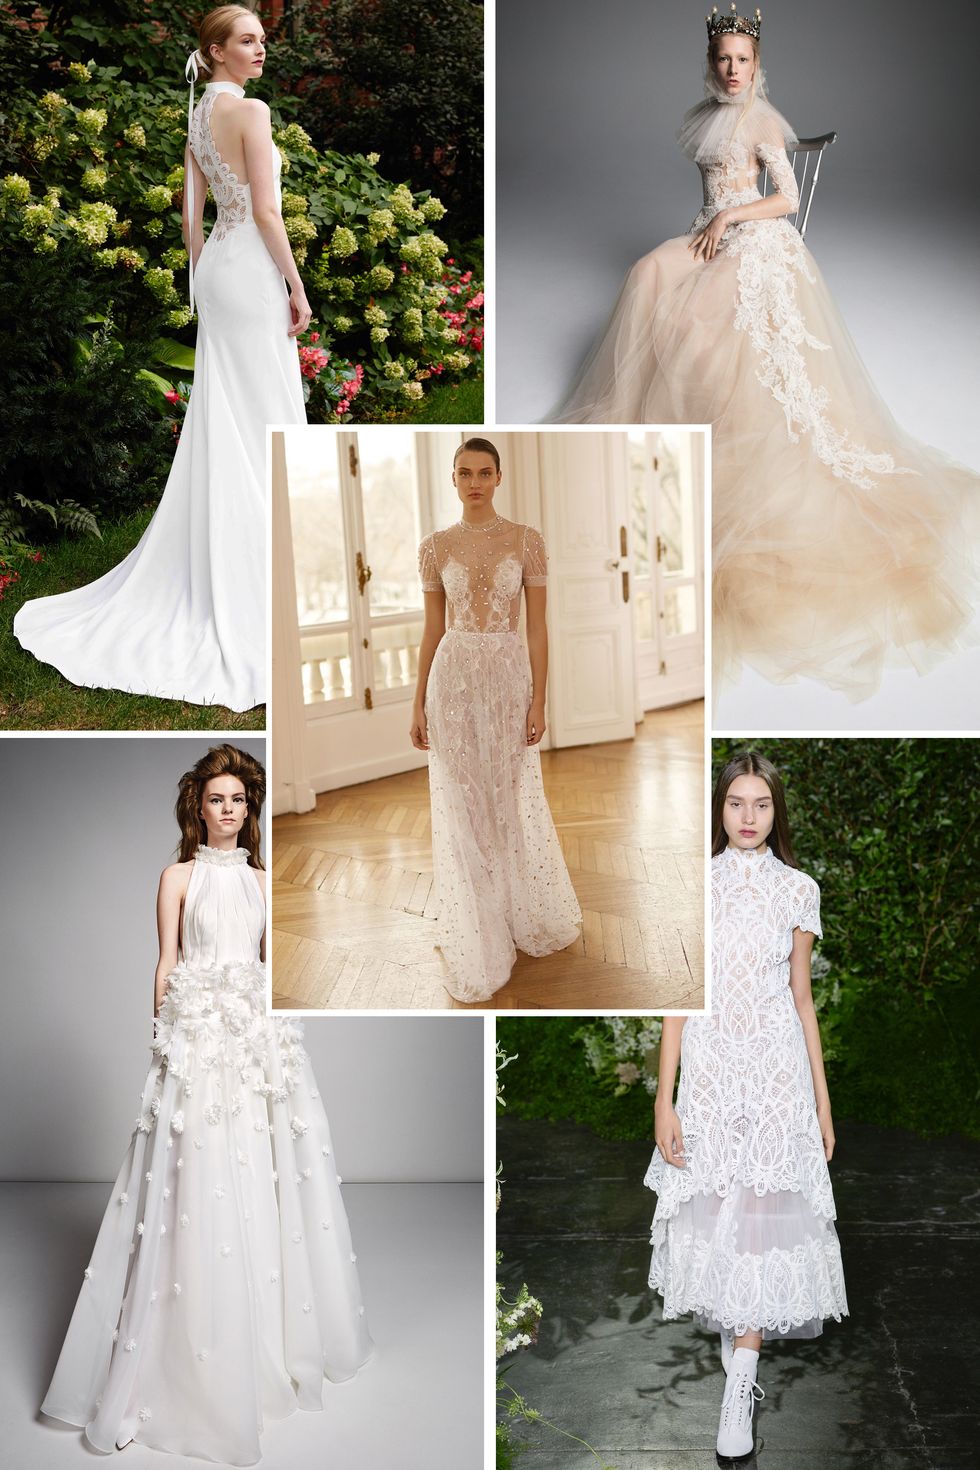 Wedding Dress Fabric: Luxury Lace Types and Designer's Bridal Fabric Trends  2018